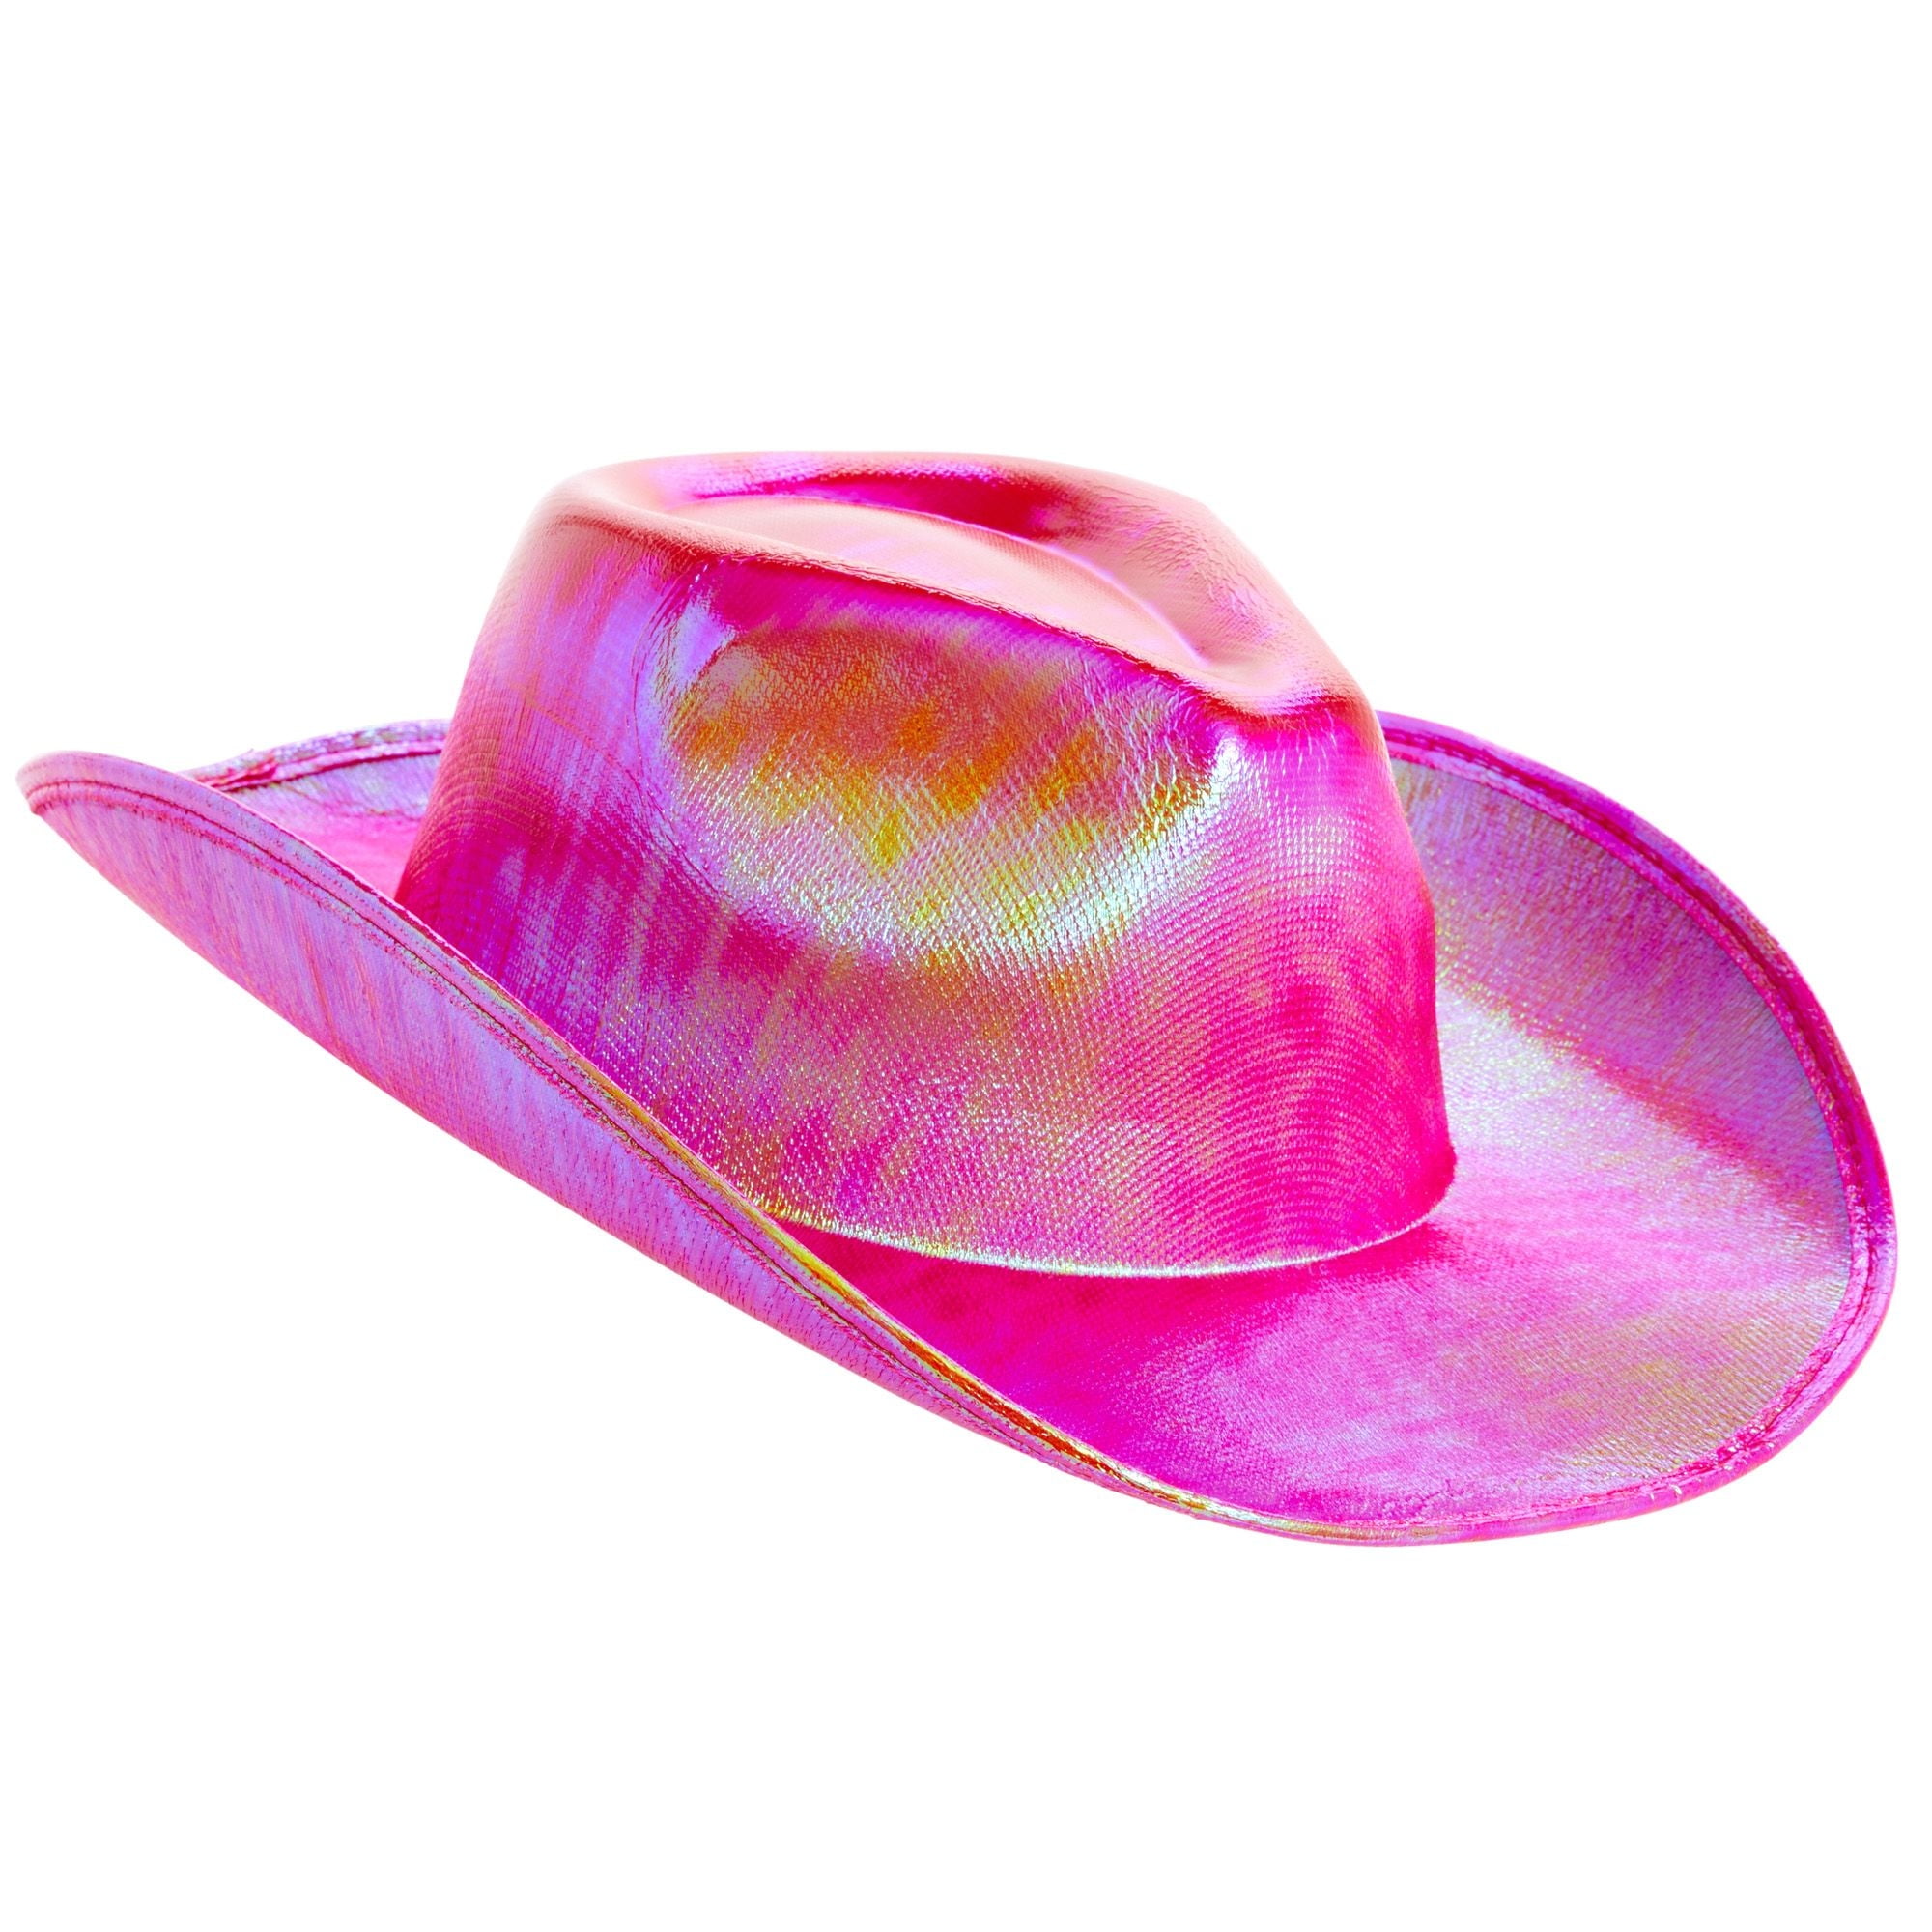 Pink Cowboy Hat - Sparkly Metallic Cowgirl Hat for Costume, Dress Up  Birthday, Bachelorette Party Accessories (Adult Size, Hot Pink) 